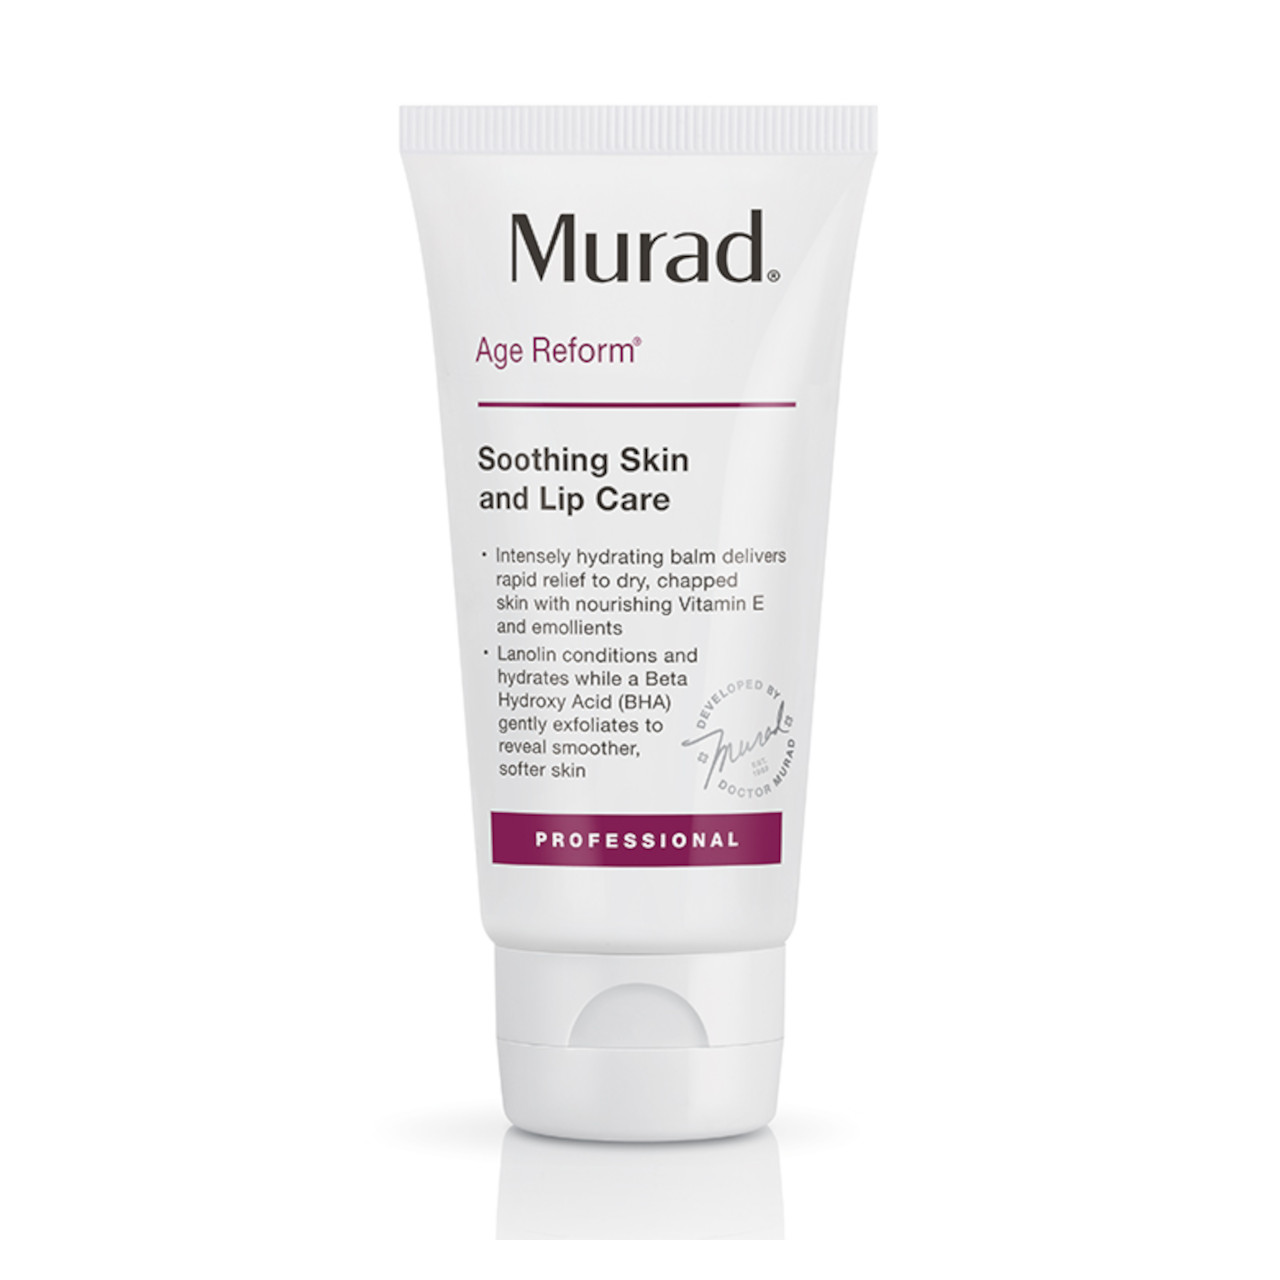 Murad Age Reform Soothing Skin and Lip Care - 1.7 oz Questions & Answers